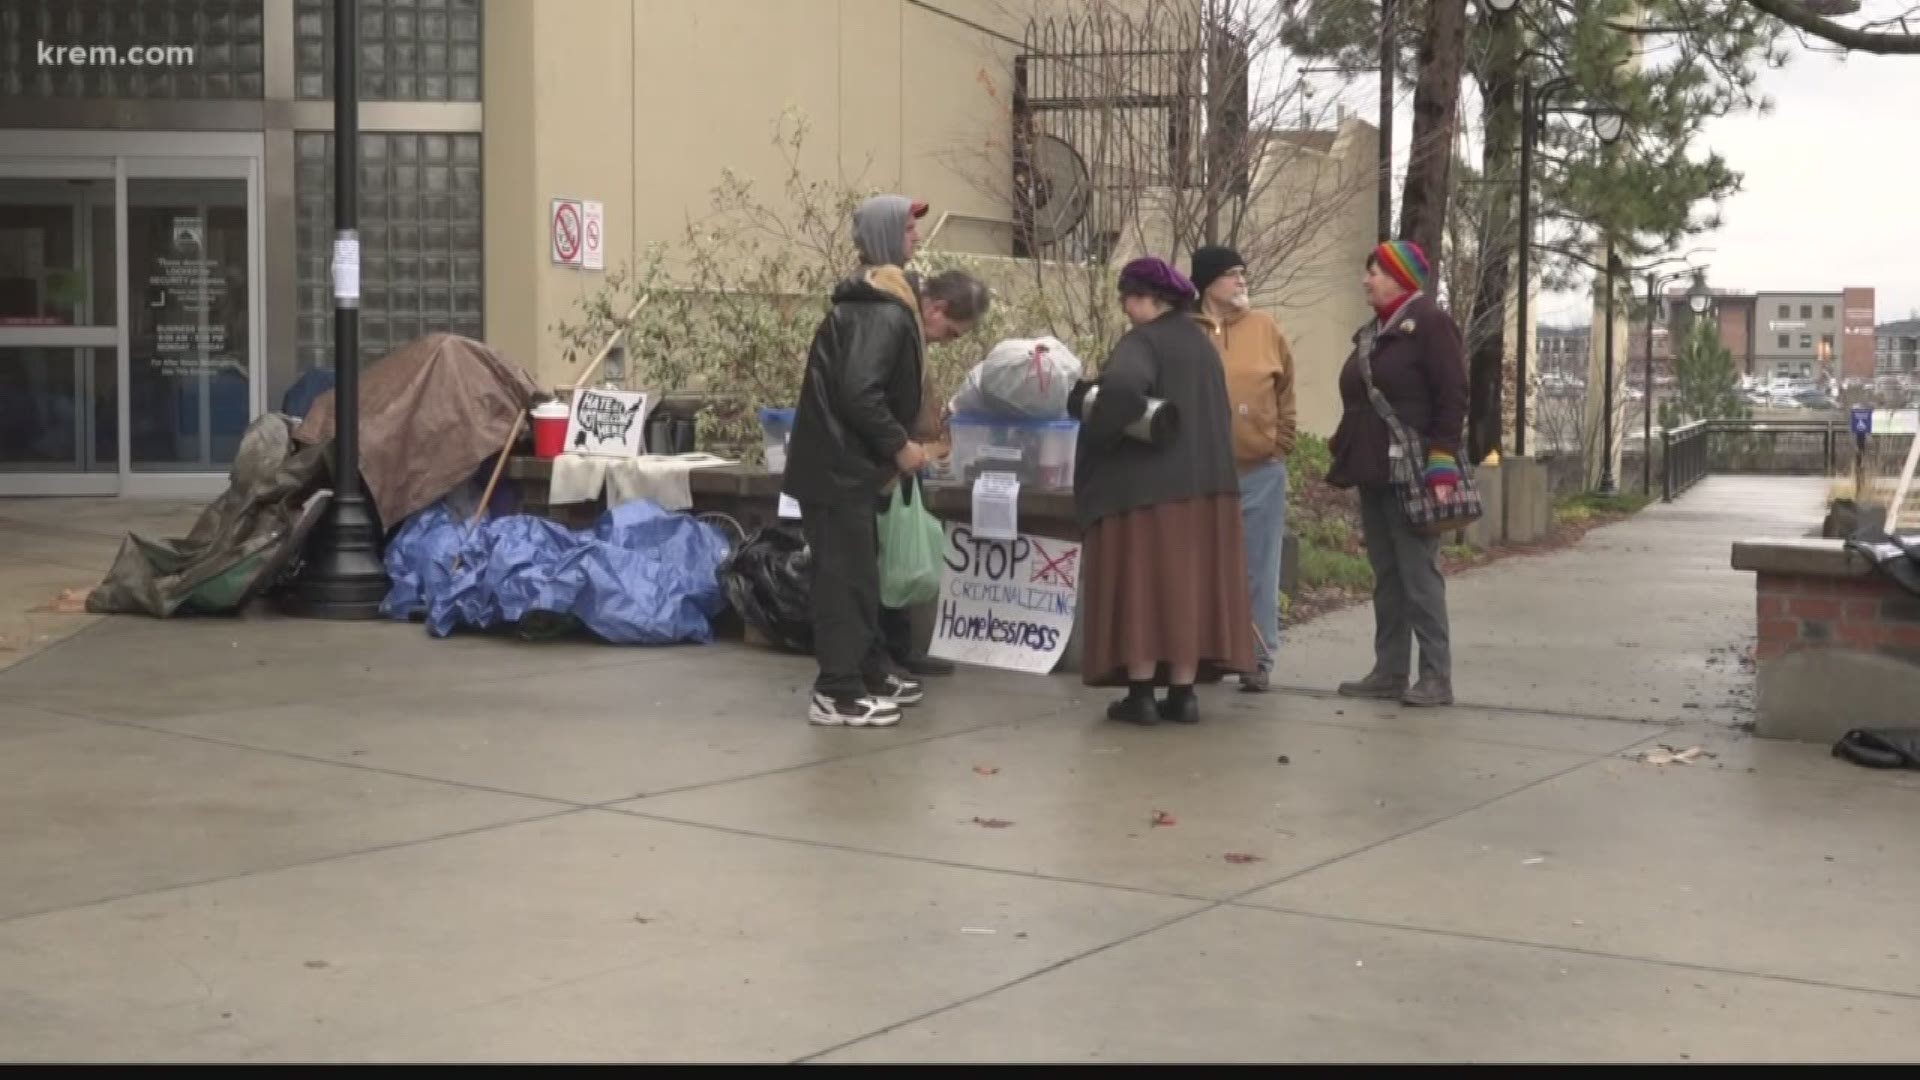 Longtime Spokane homeless activist Alfredo Llamedo passed away after his battle with liver disease. People are gathering at City Hall for a vigil in his honor.